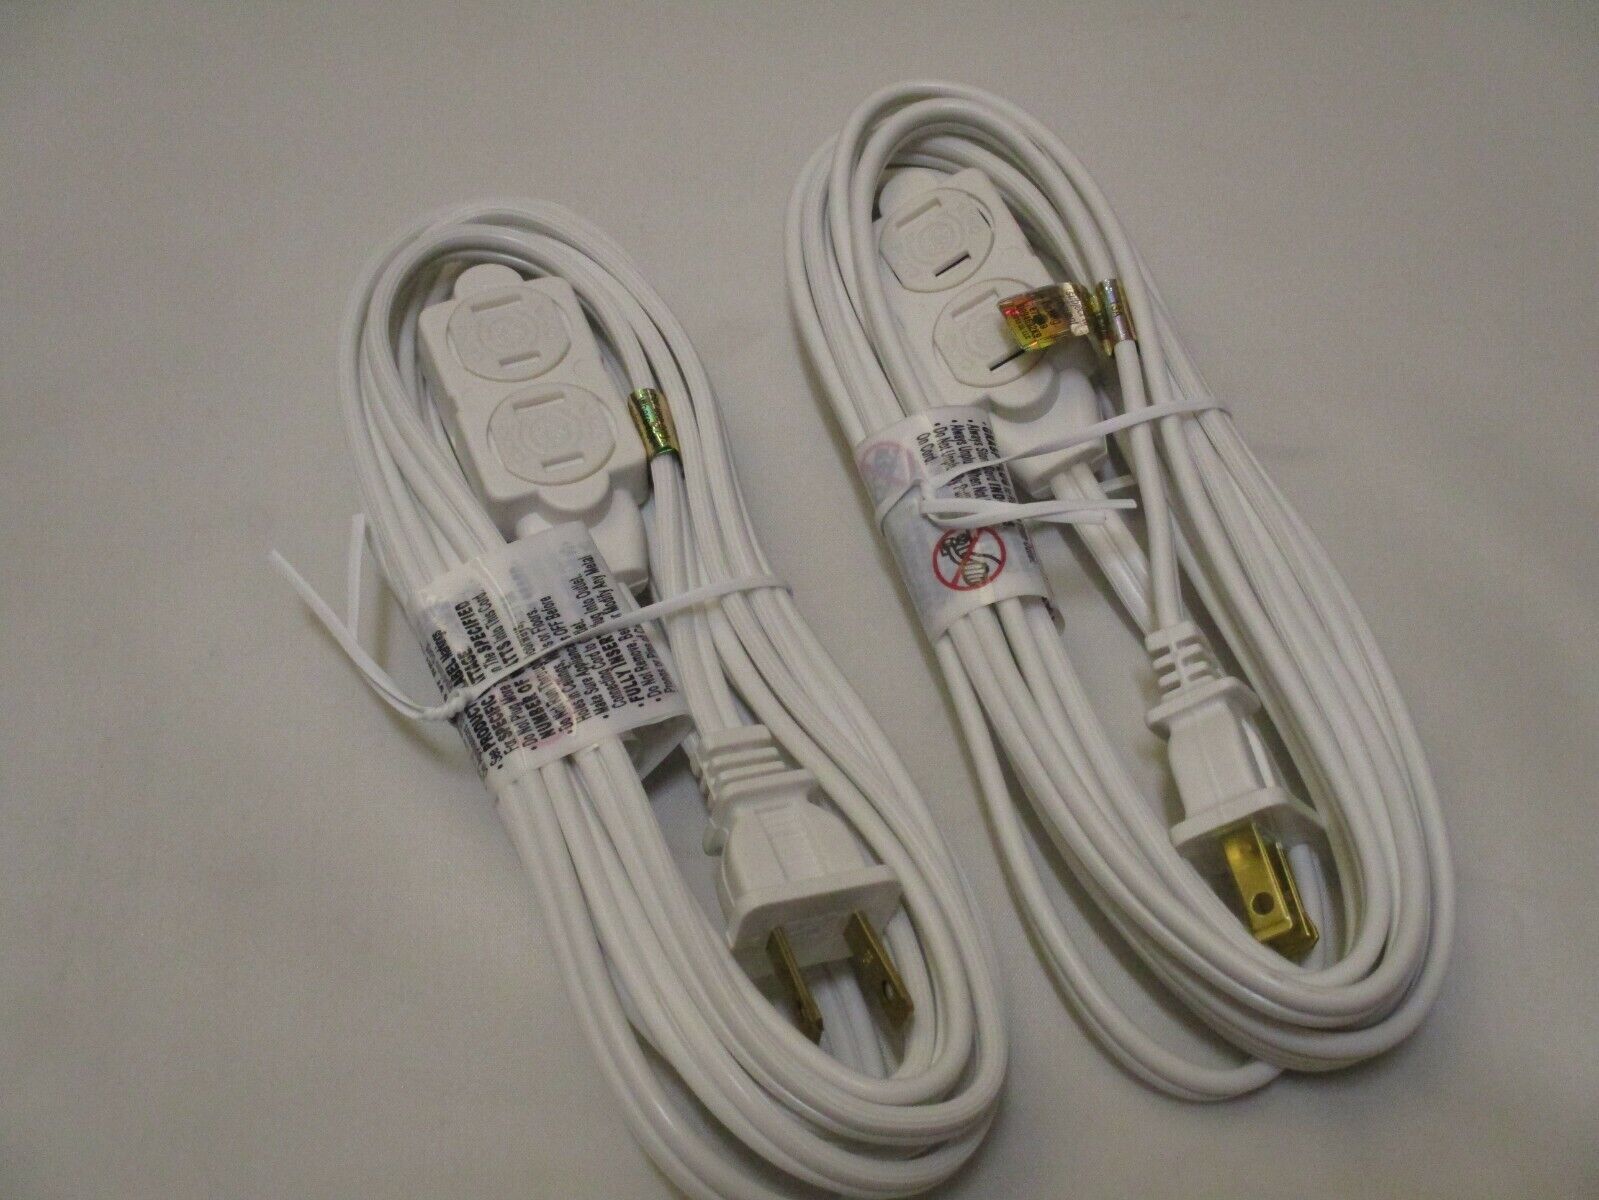 GE 12 Ft 3 Outlet Power Strip, 2 Prong 16 Gauge Twist-to-Close Cover, 2 Pack - $17.95